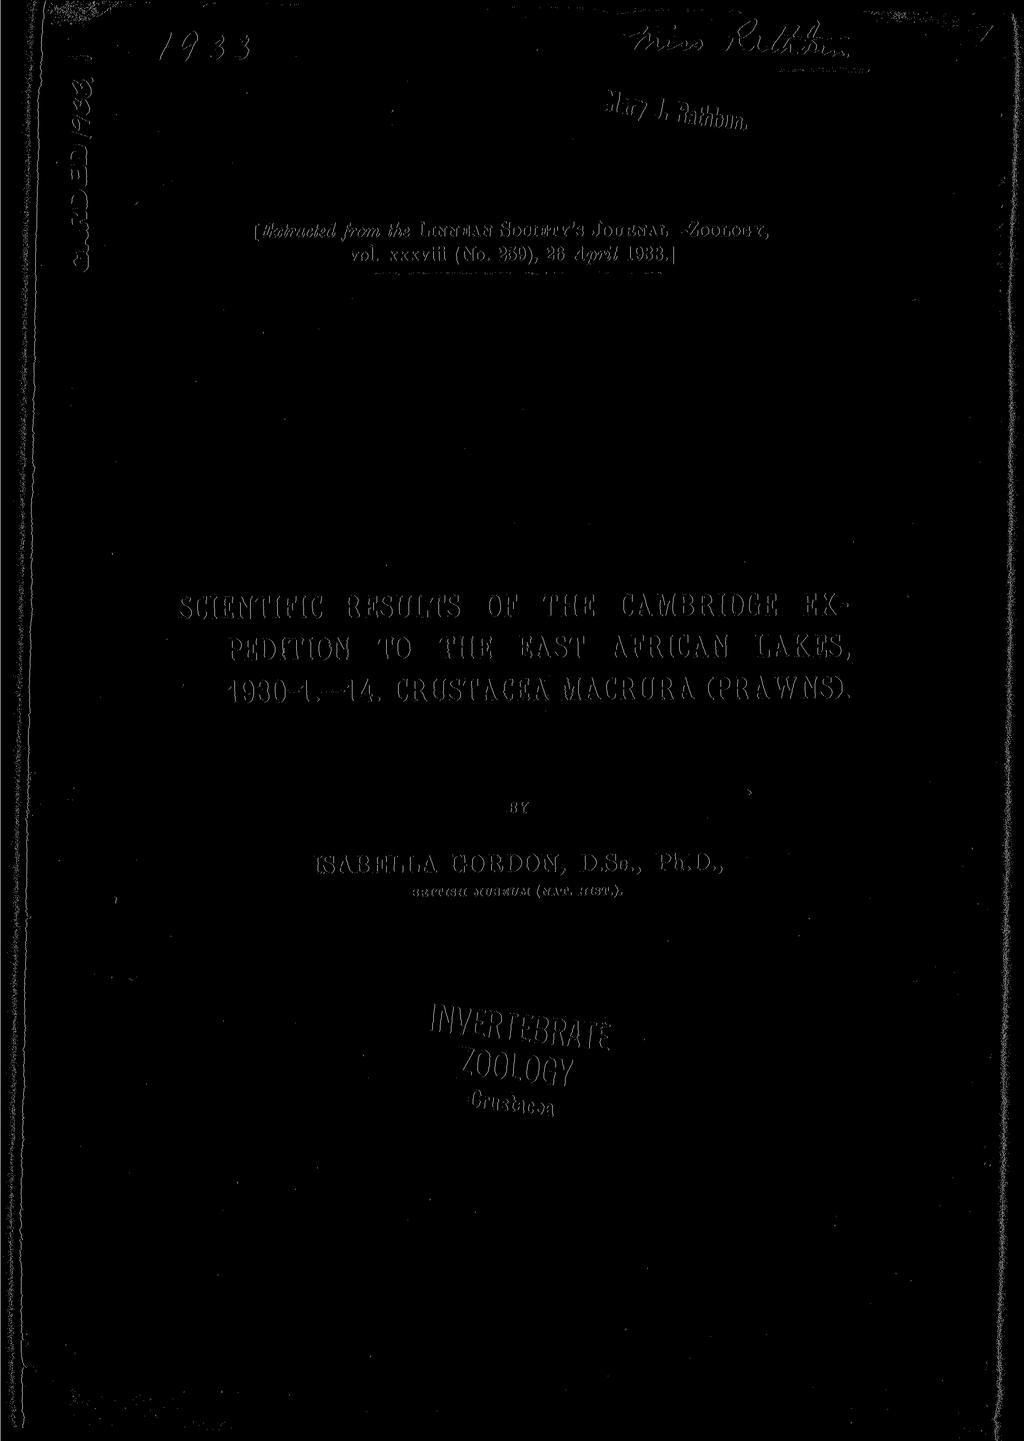 Q id Q Rathbun, [Extracted from the LINNEAN SOCIETY'S JOURNAL ZOOLOGY, vol. xxxviii (No. 259), 26 April 1933.